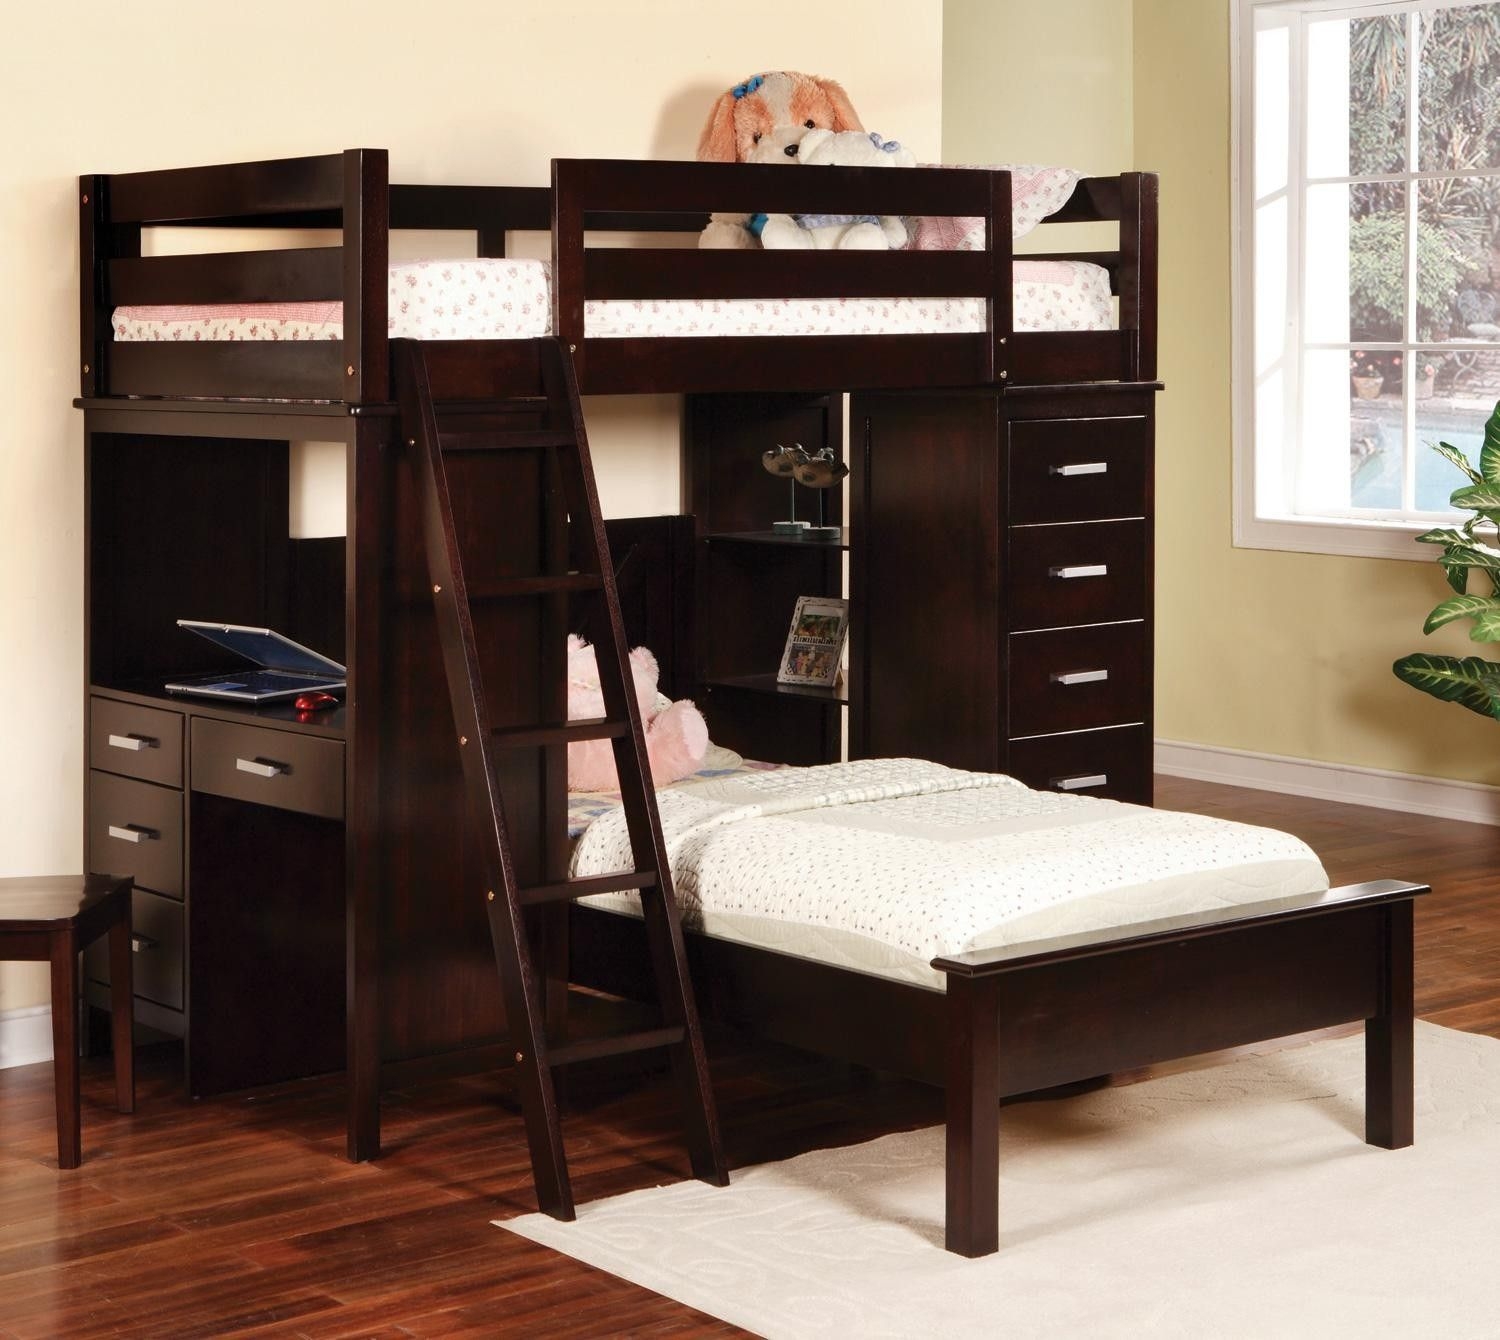 Bunk bed with desk and drawers 1